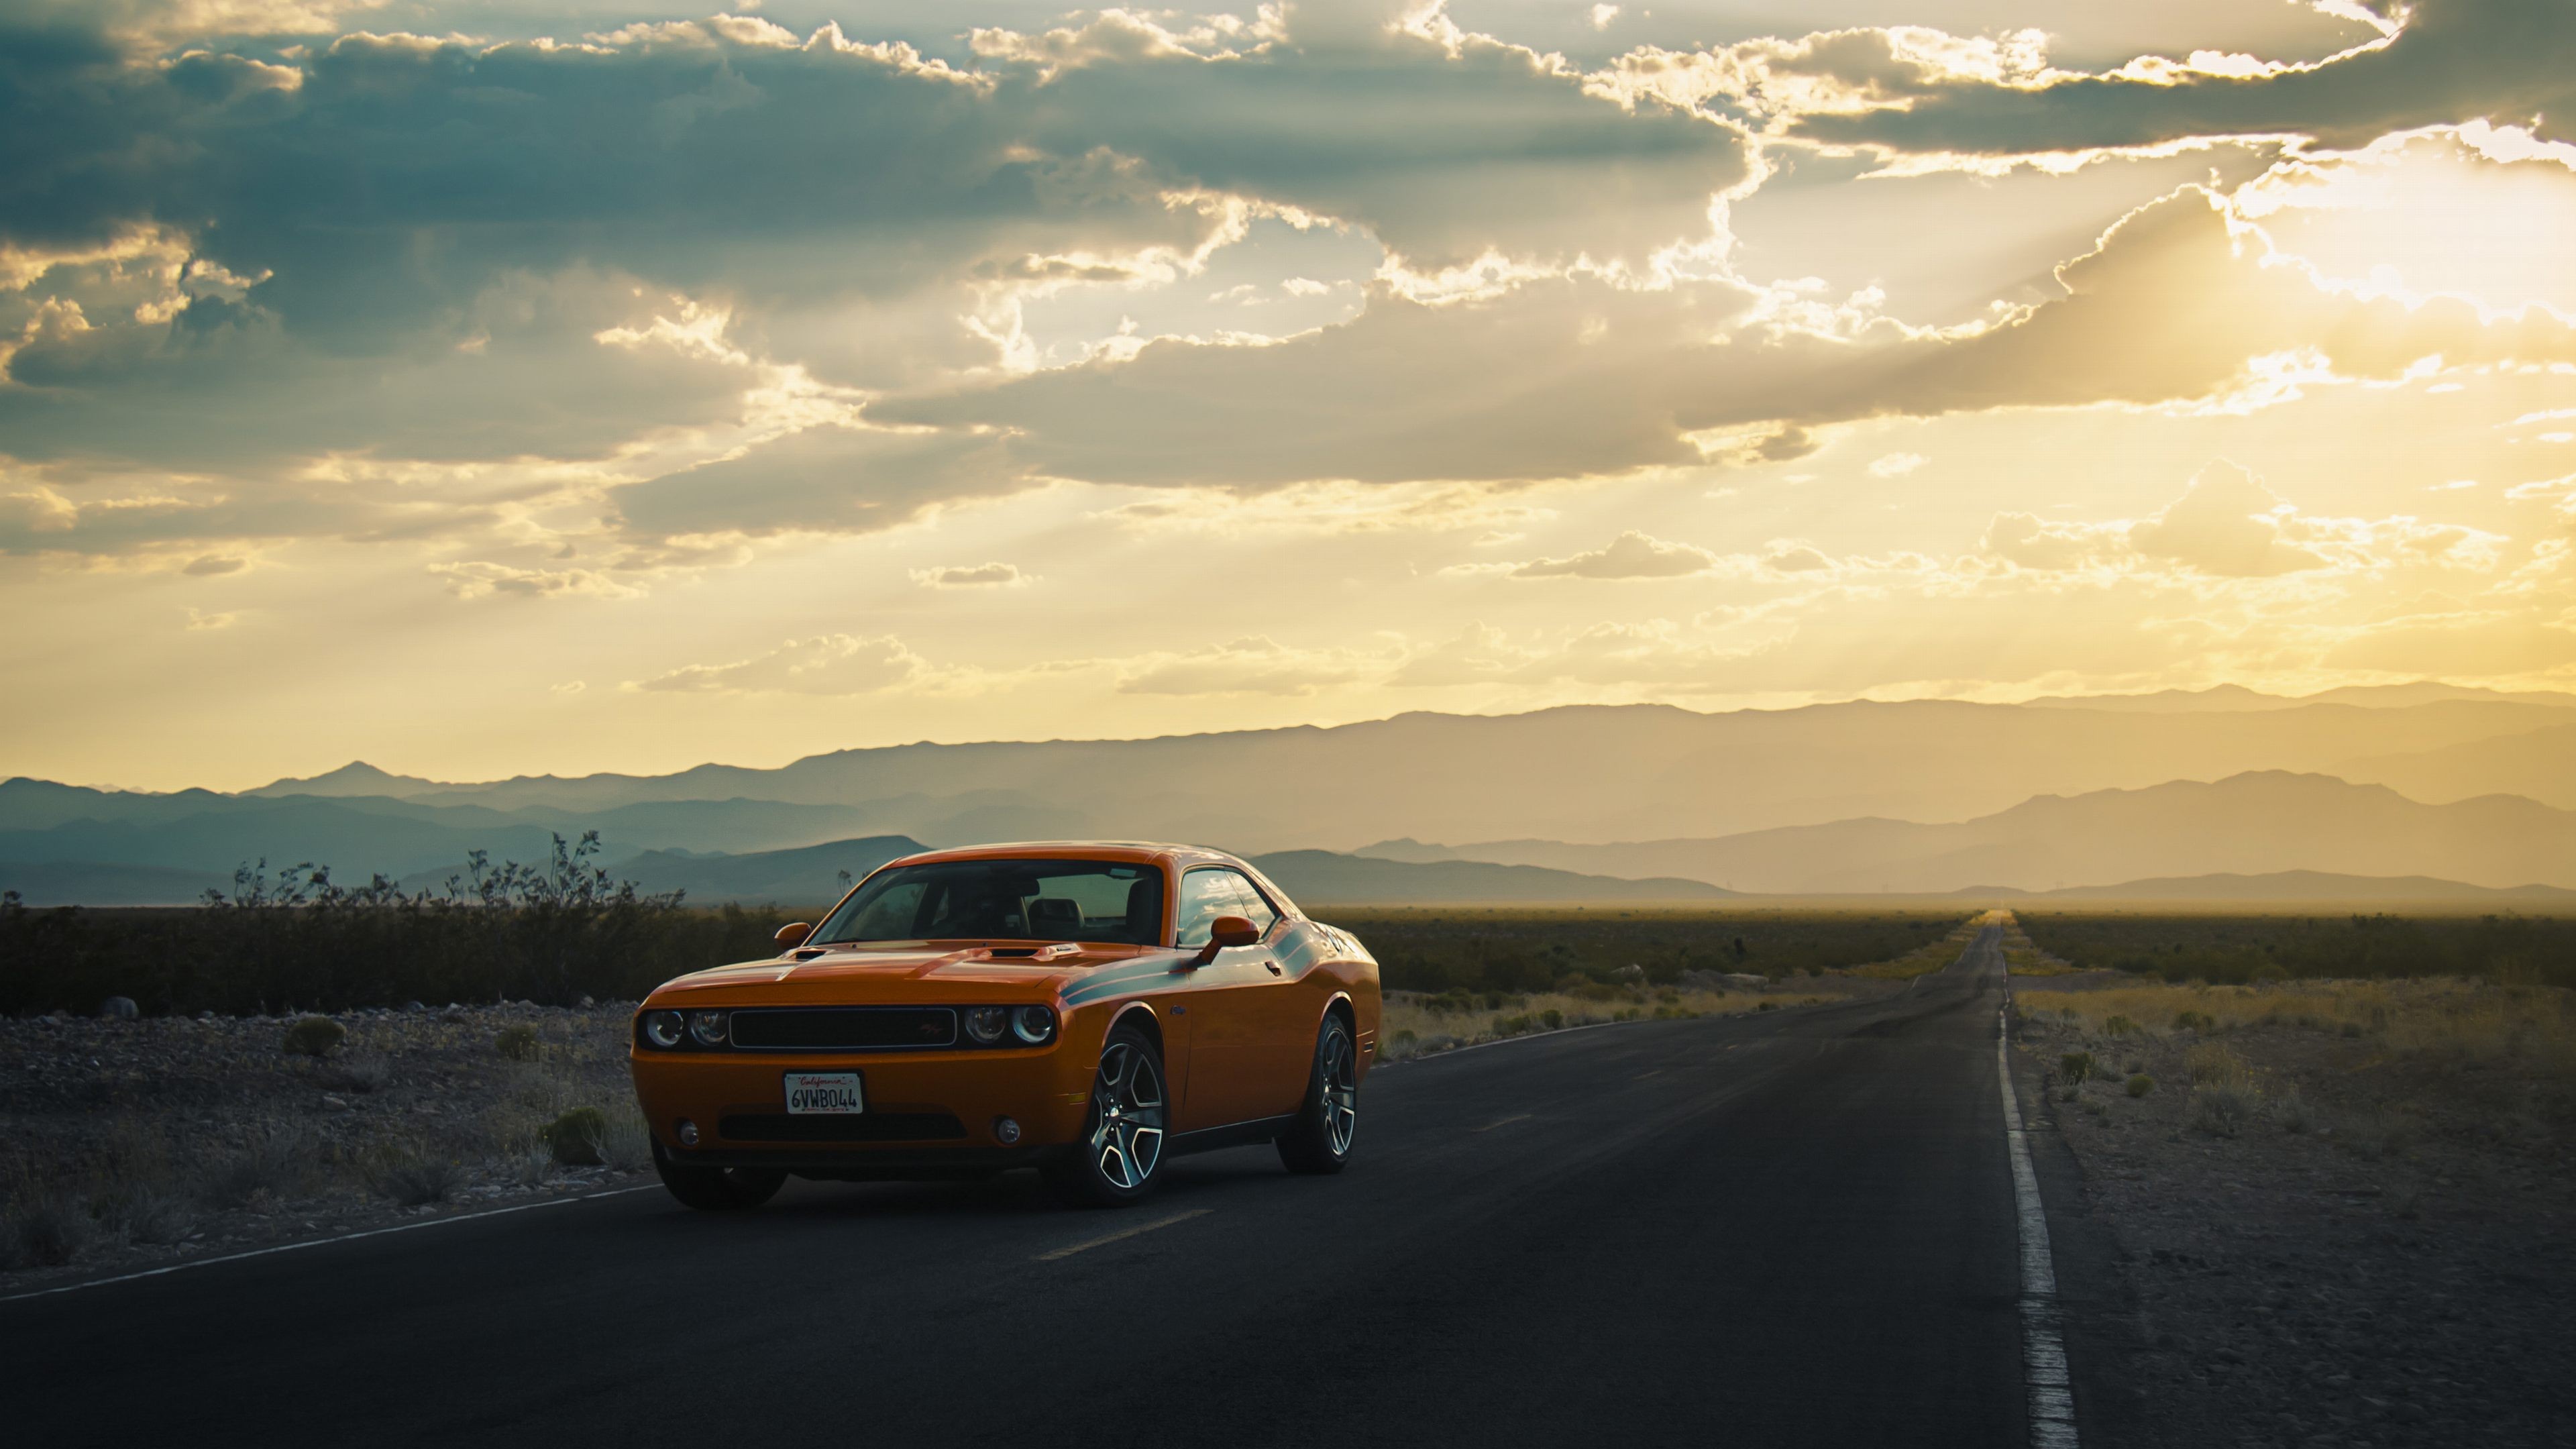 Dodge Challenger Wallpapers, Pictures, Images